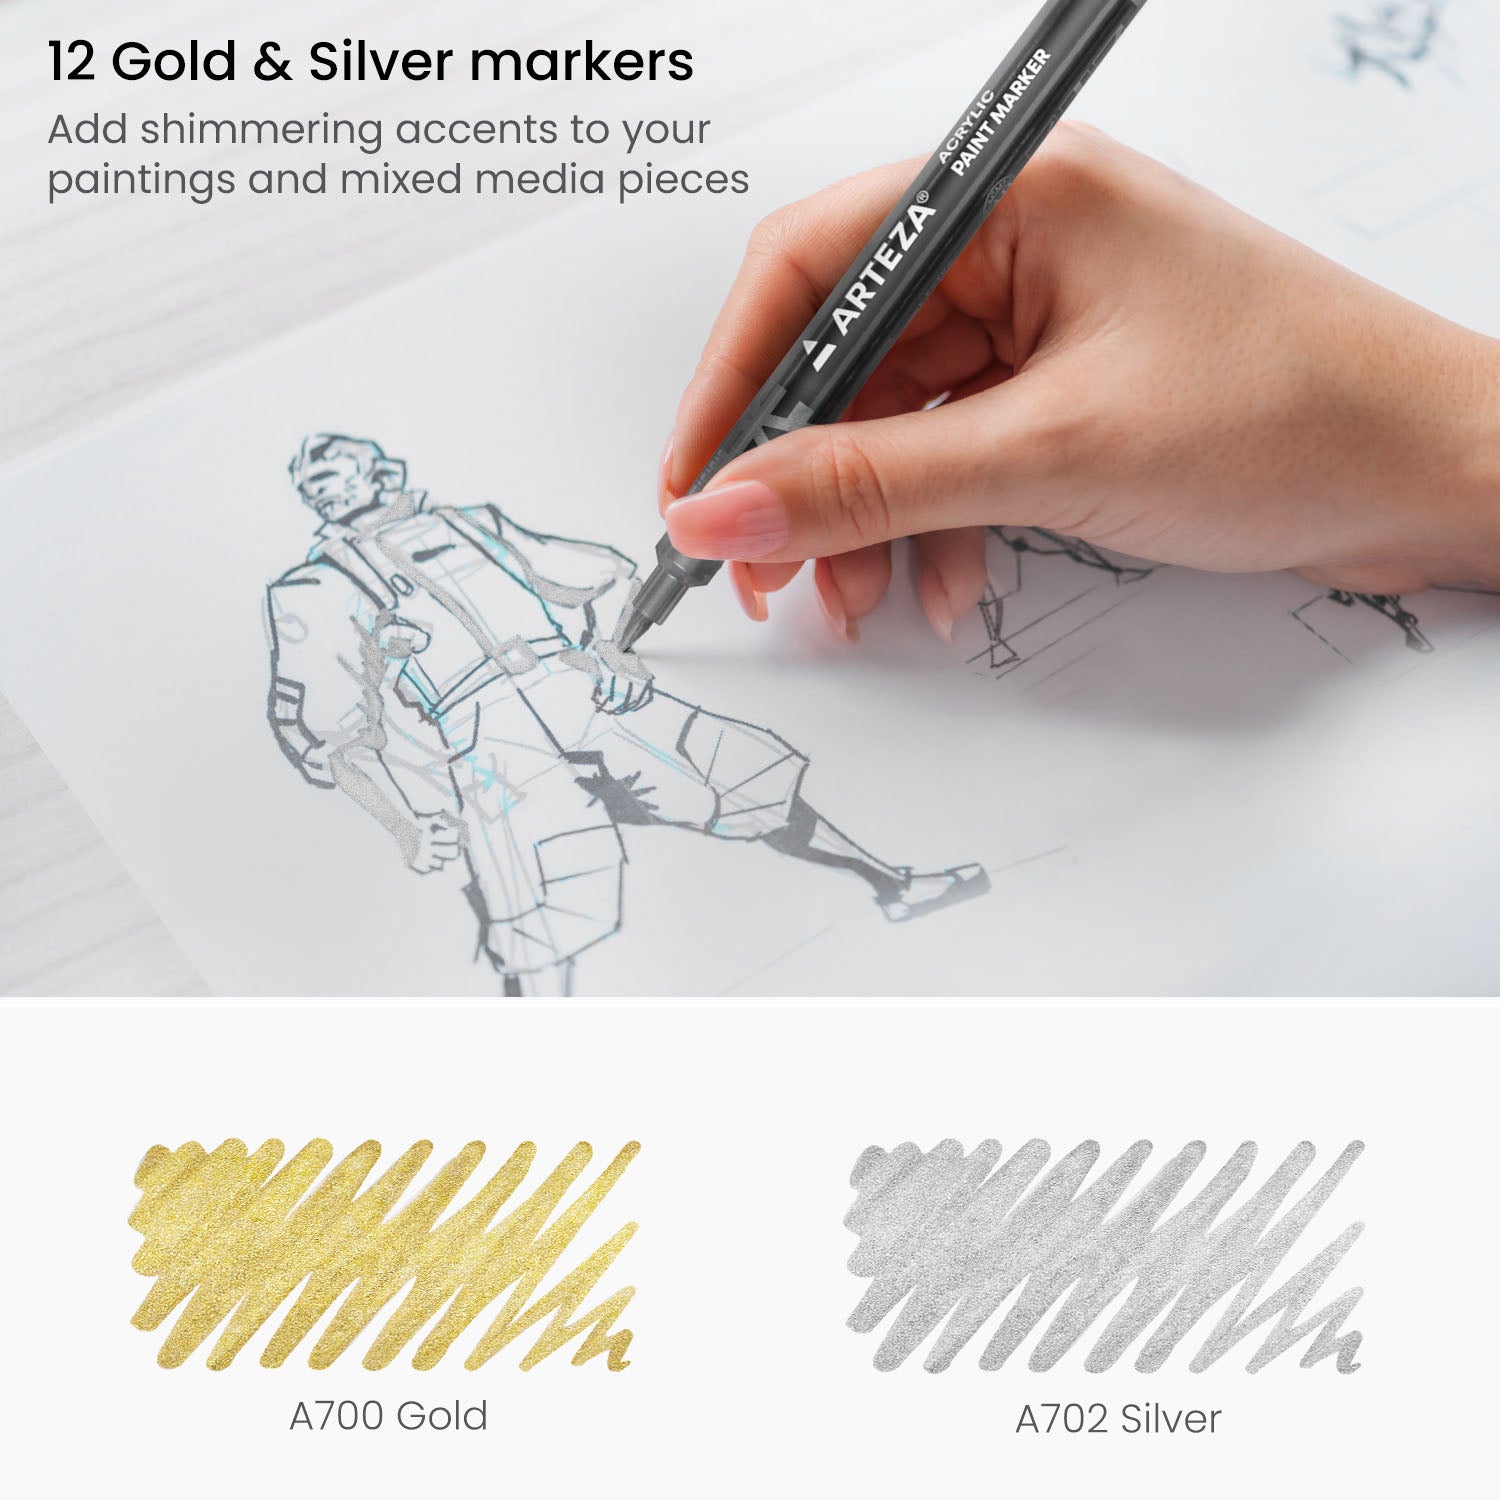 Drawing with Premium Set Acrylic Markers Metallic Silver and Gold